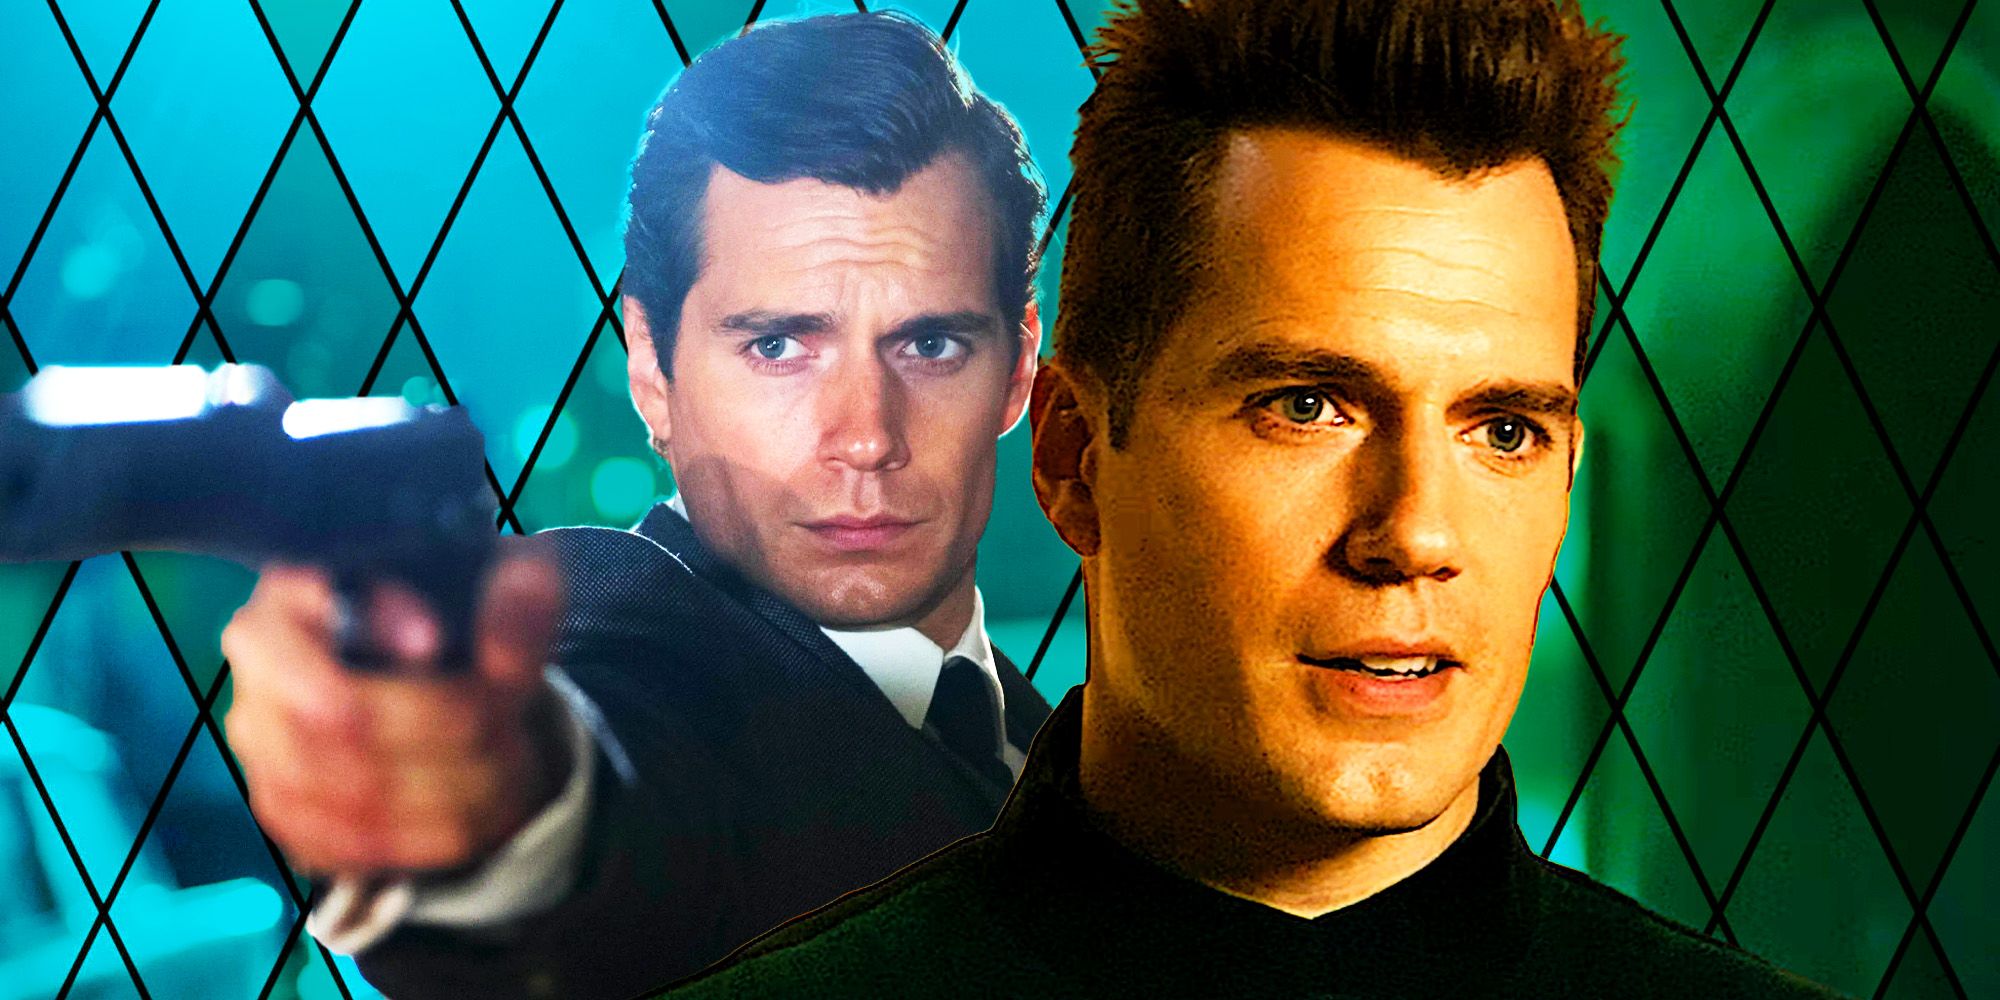 Henry Cavill's New Movie Is The Closest We'll Get To The Man From UNCLE 2